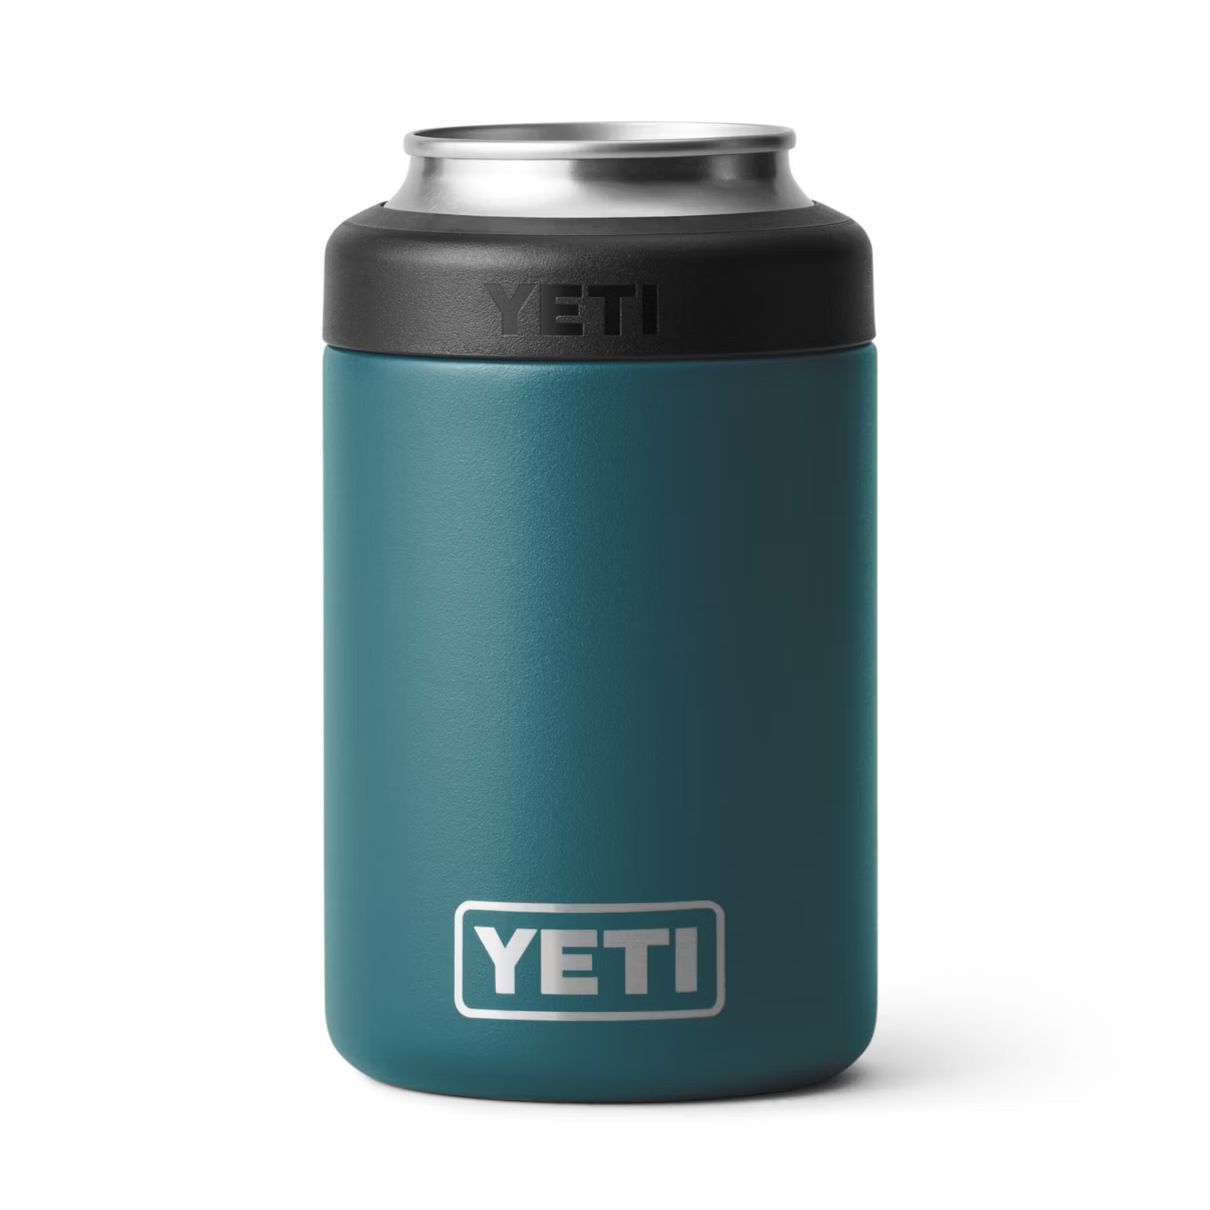 Yeti Rambler 12 oz. Colster Can Insulator-Hunting/Outdoors-Agave Teal-Kevin's Fine Outdoor Gear & Apparel